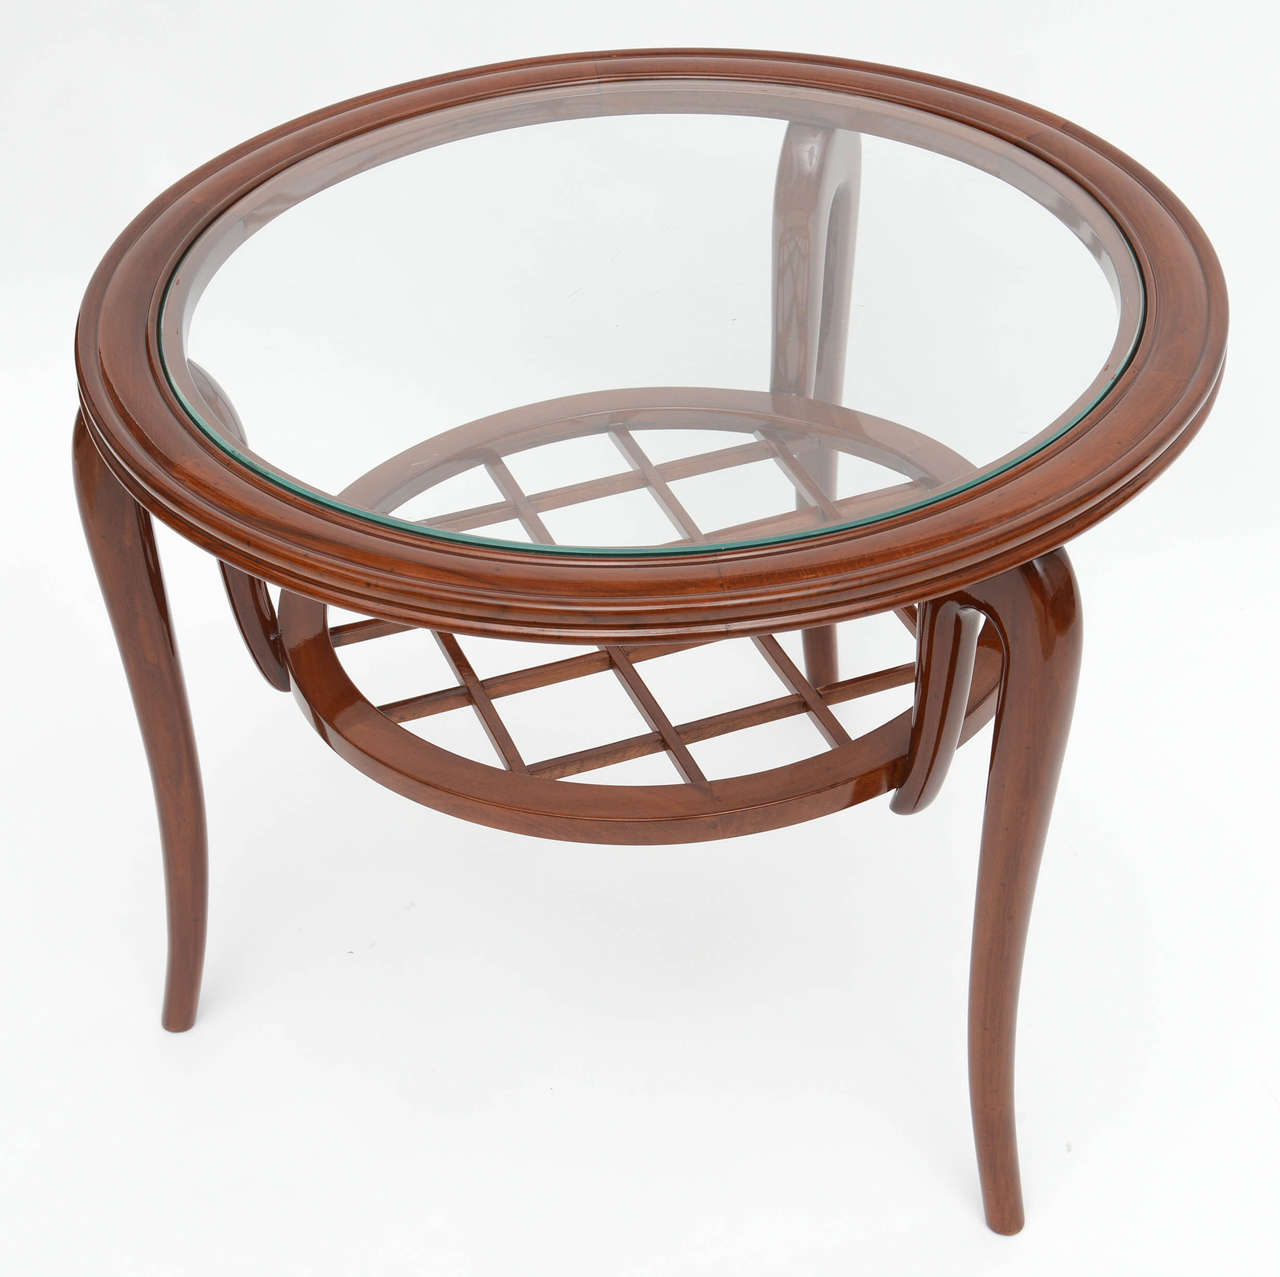 The circular top with inset glass with curved sculptural legs above a second tier with basket weave pattern.
Literature: illustrated in repertorio del design italiano- giuliani gramigna.